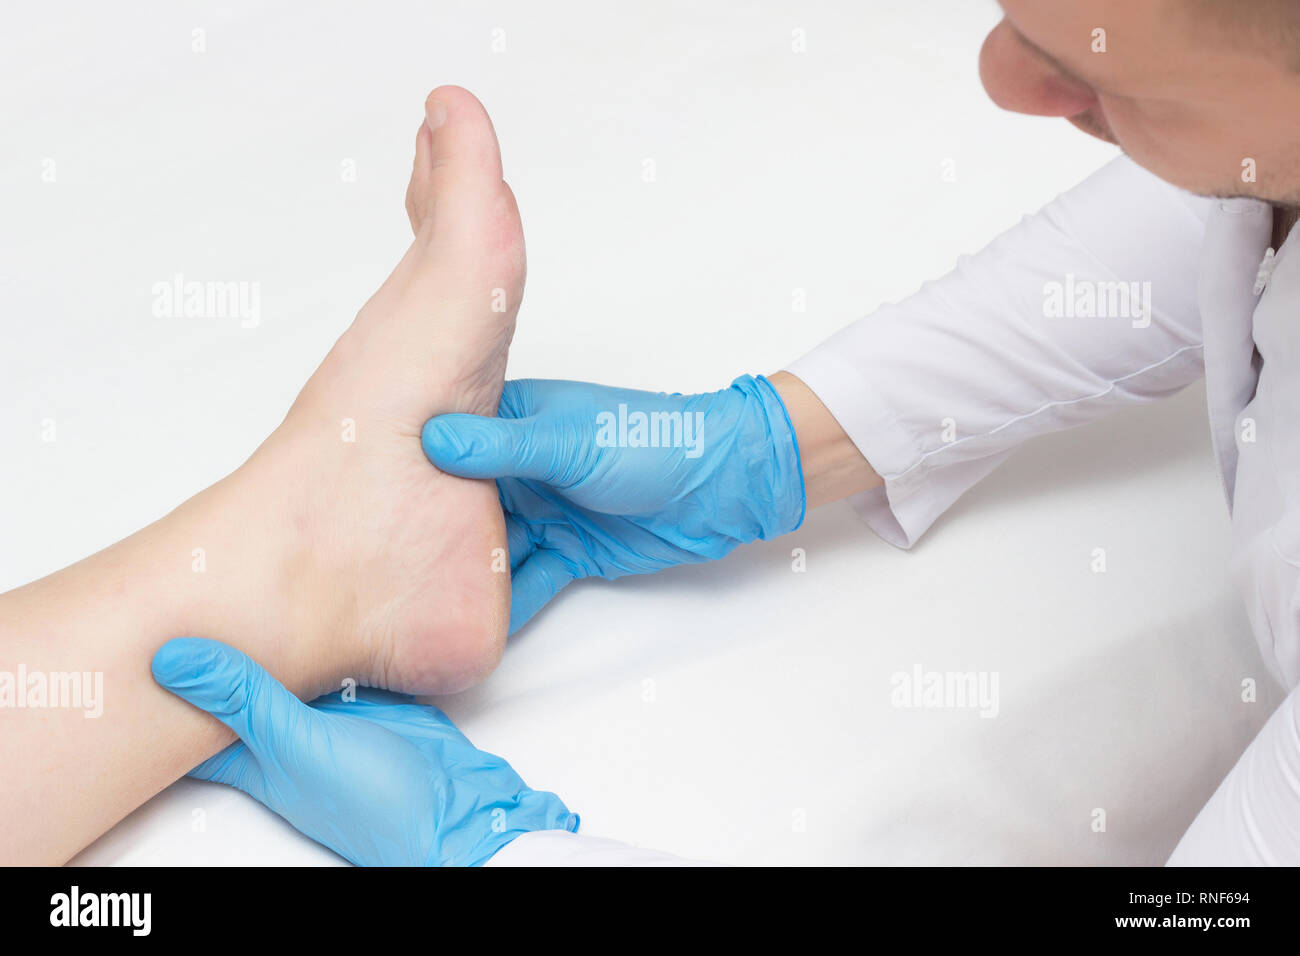 Doctor examines the patient's leg with heel spurs, pain in the foot, white background, close-up, plantar fasciitis, inspection Stock Photo